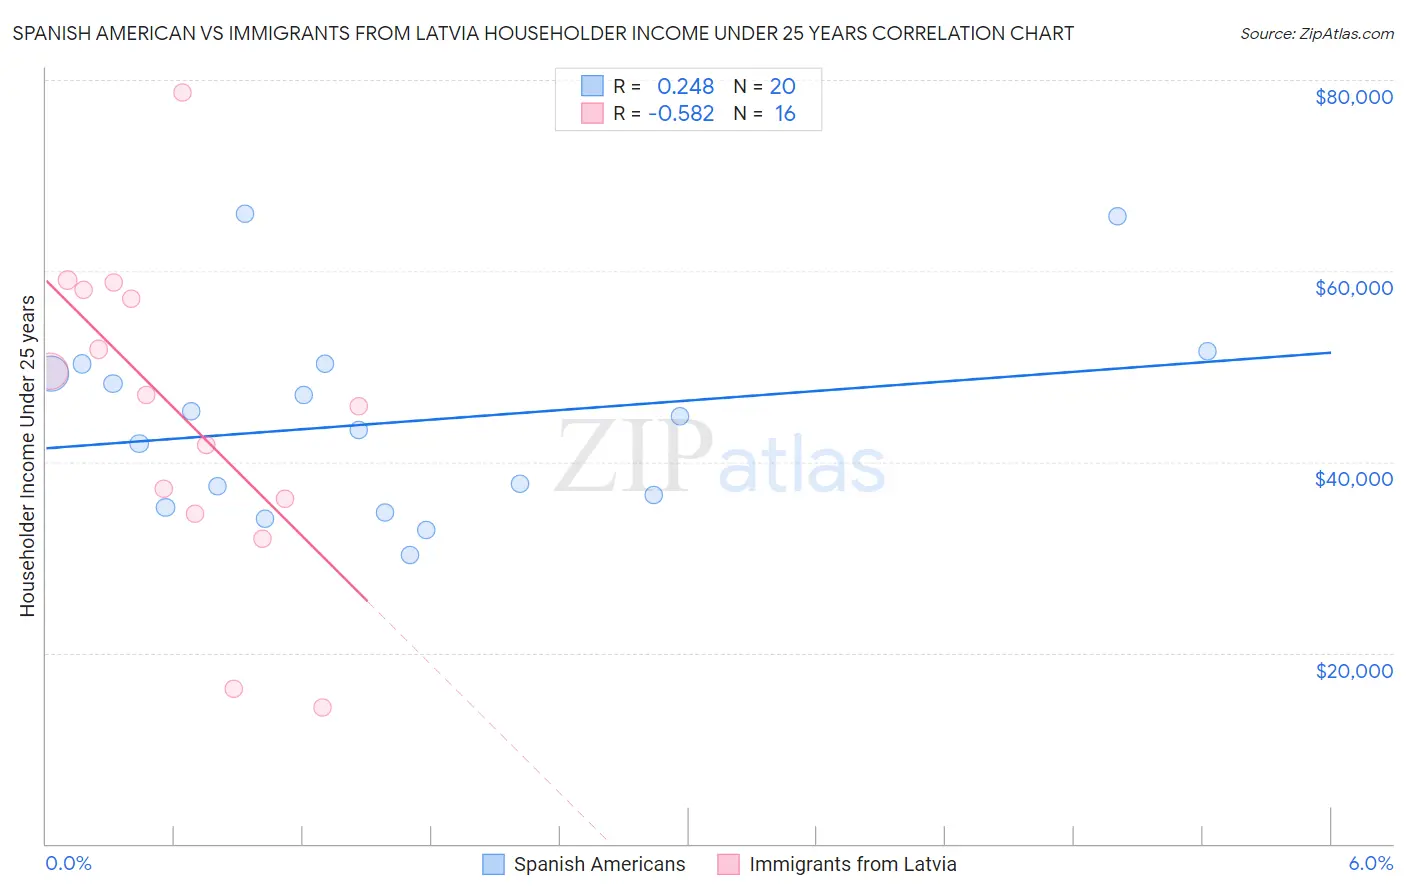 Spanish American vs Immigrants from Latvia Householder Income Under 25 years